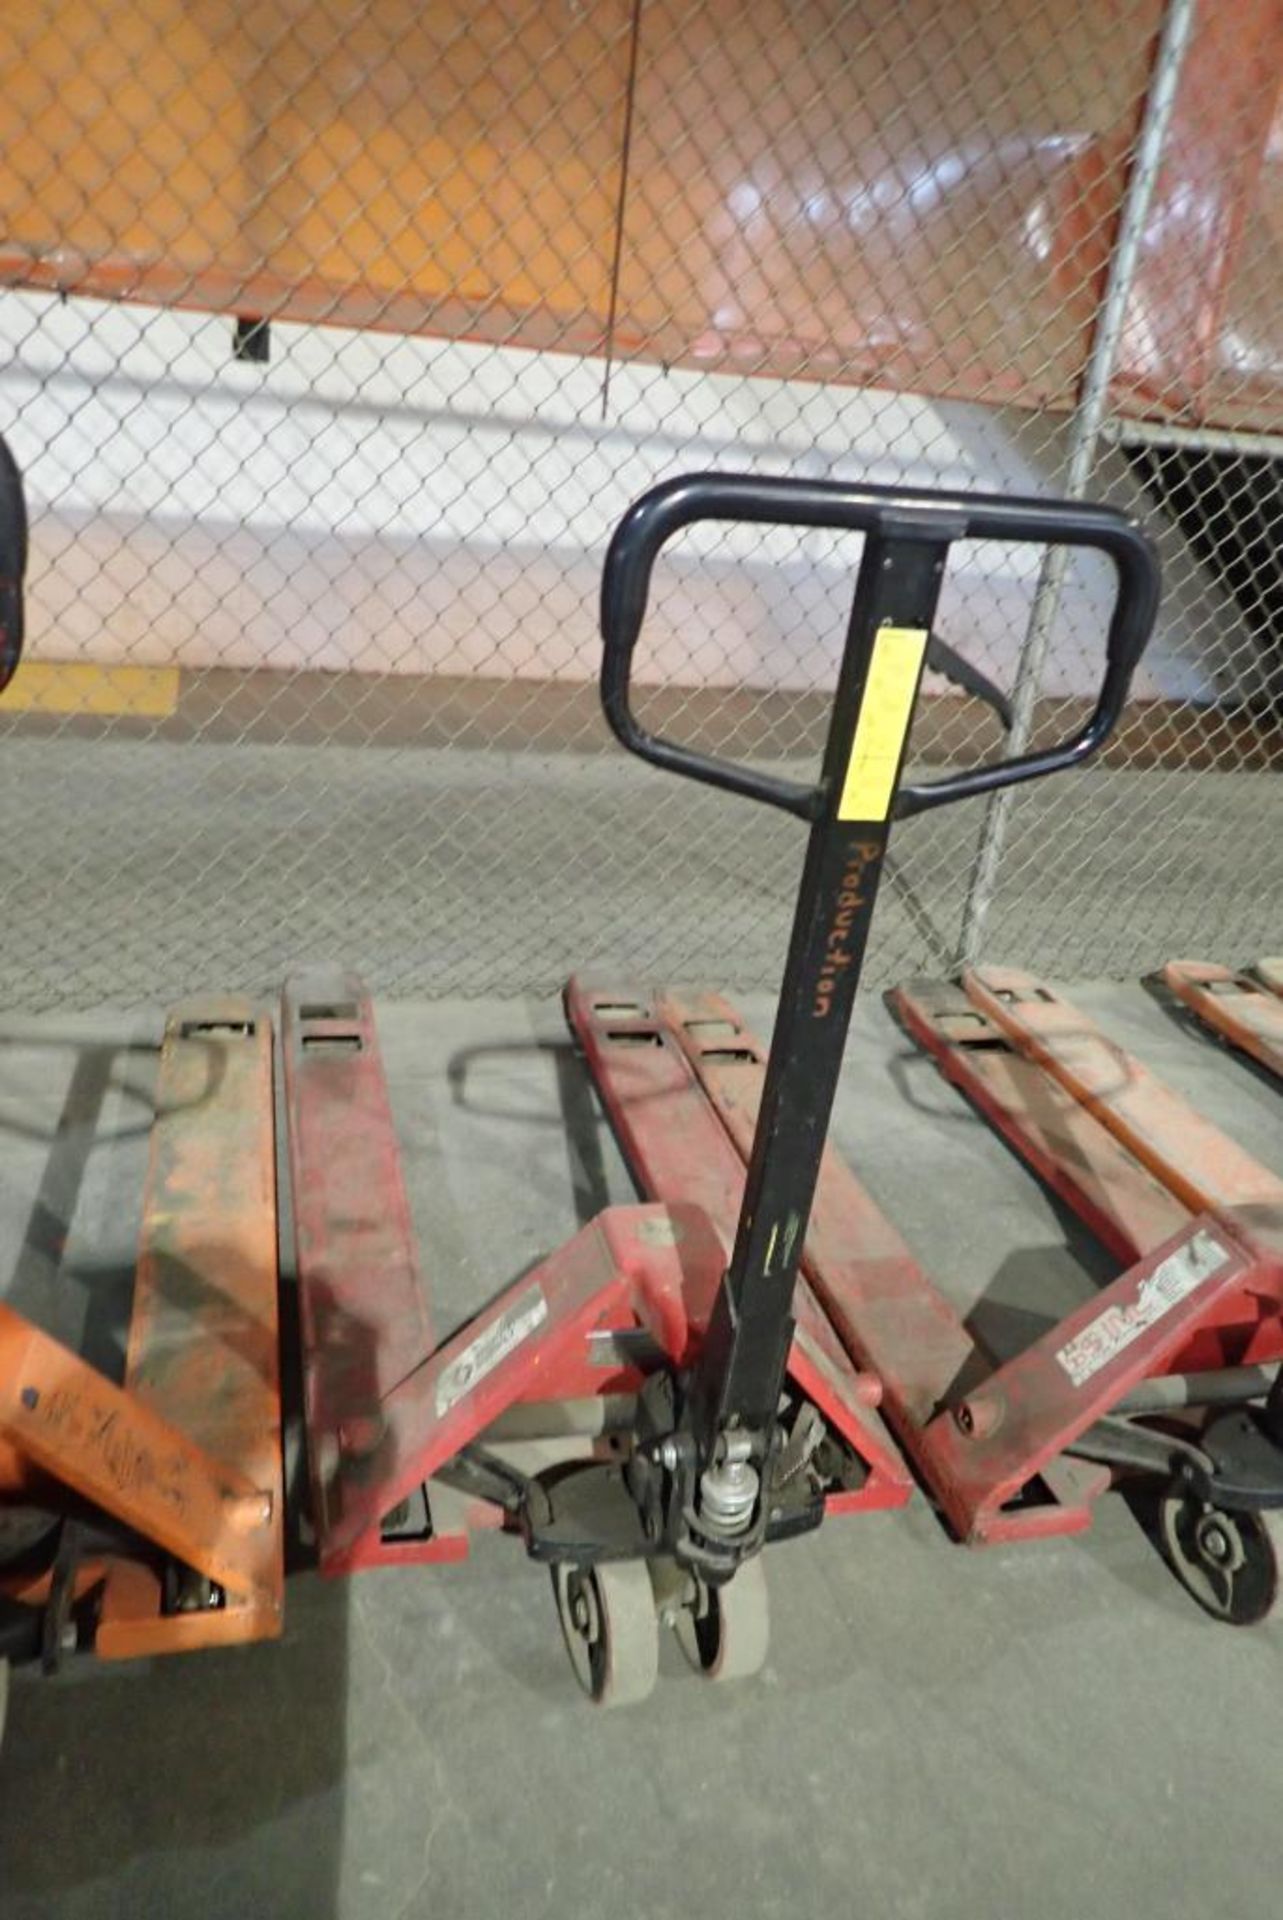 Pallet Jack. *BEING USED FOR LOADOUT, CANNOT BE REMOVED UNTIL SEPT 27/22 @ 3PM*